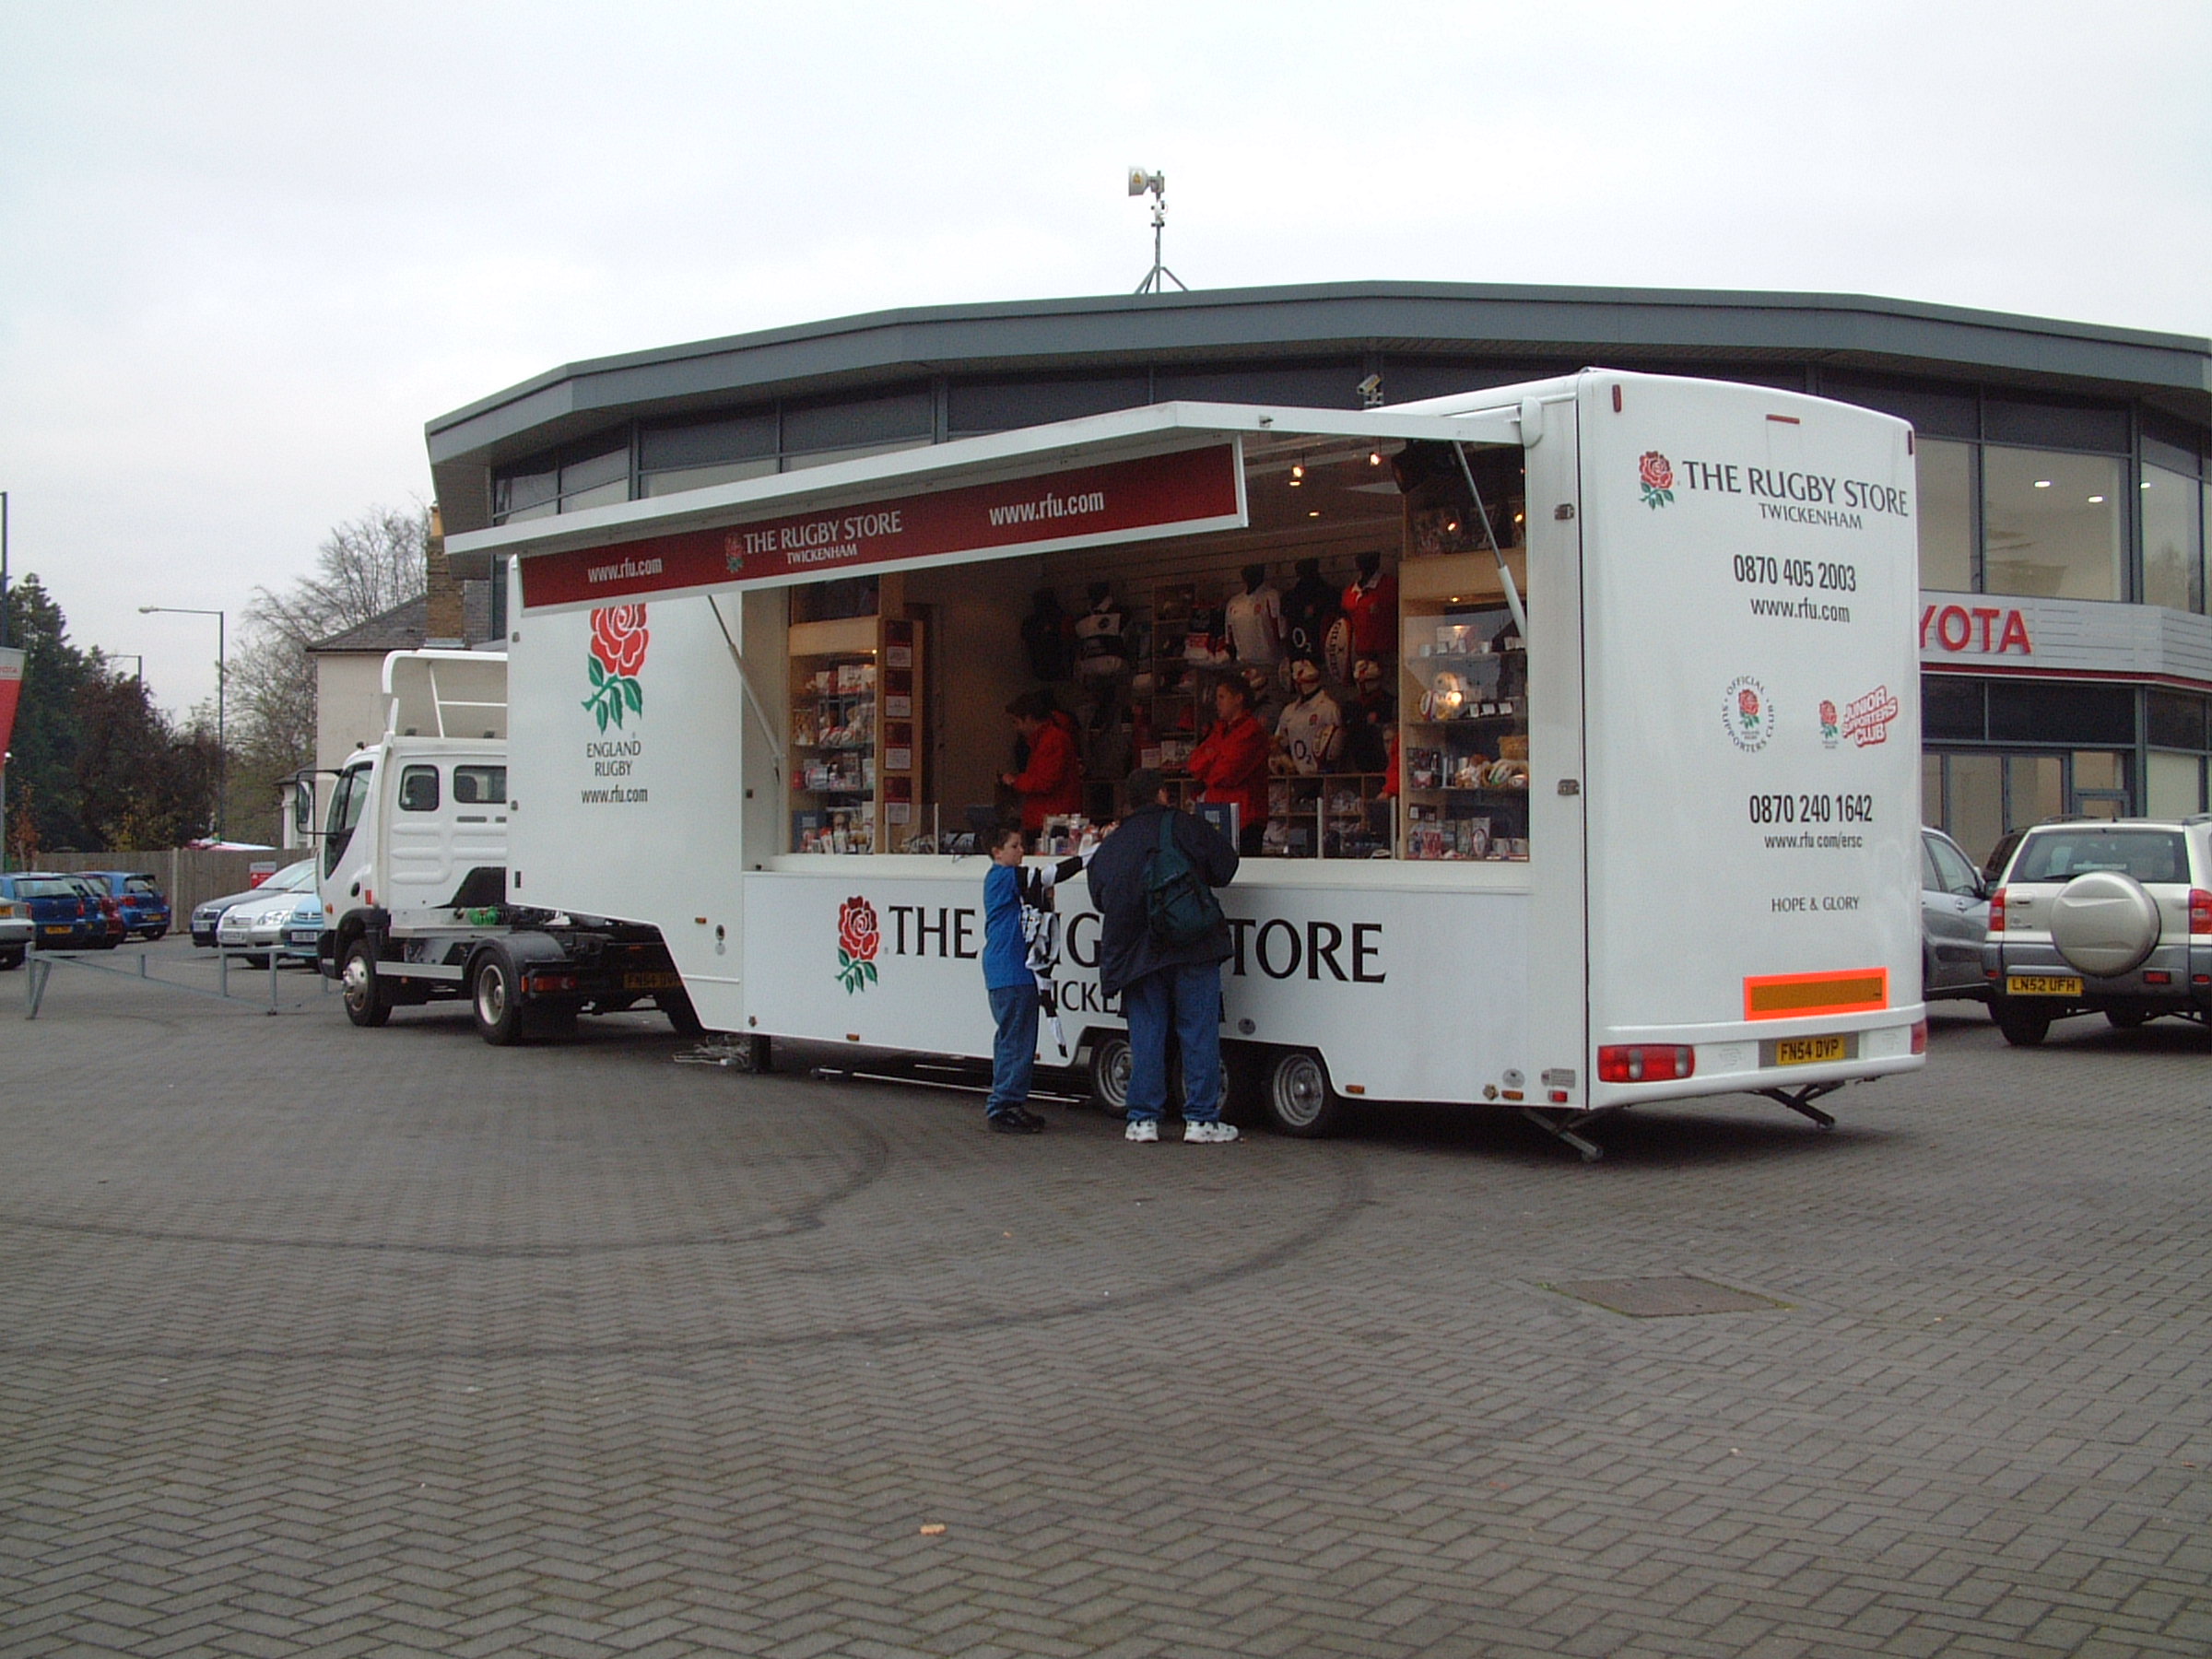 England Rugby Mobile merchandising unit set up nearside view